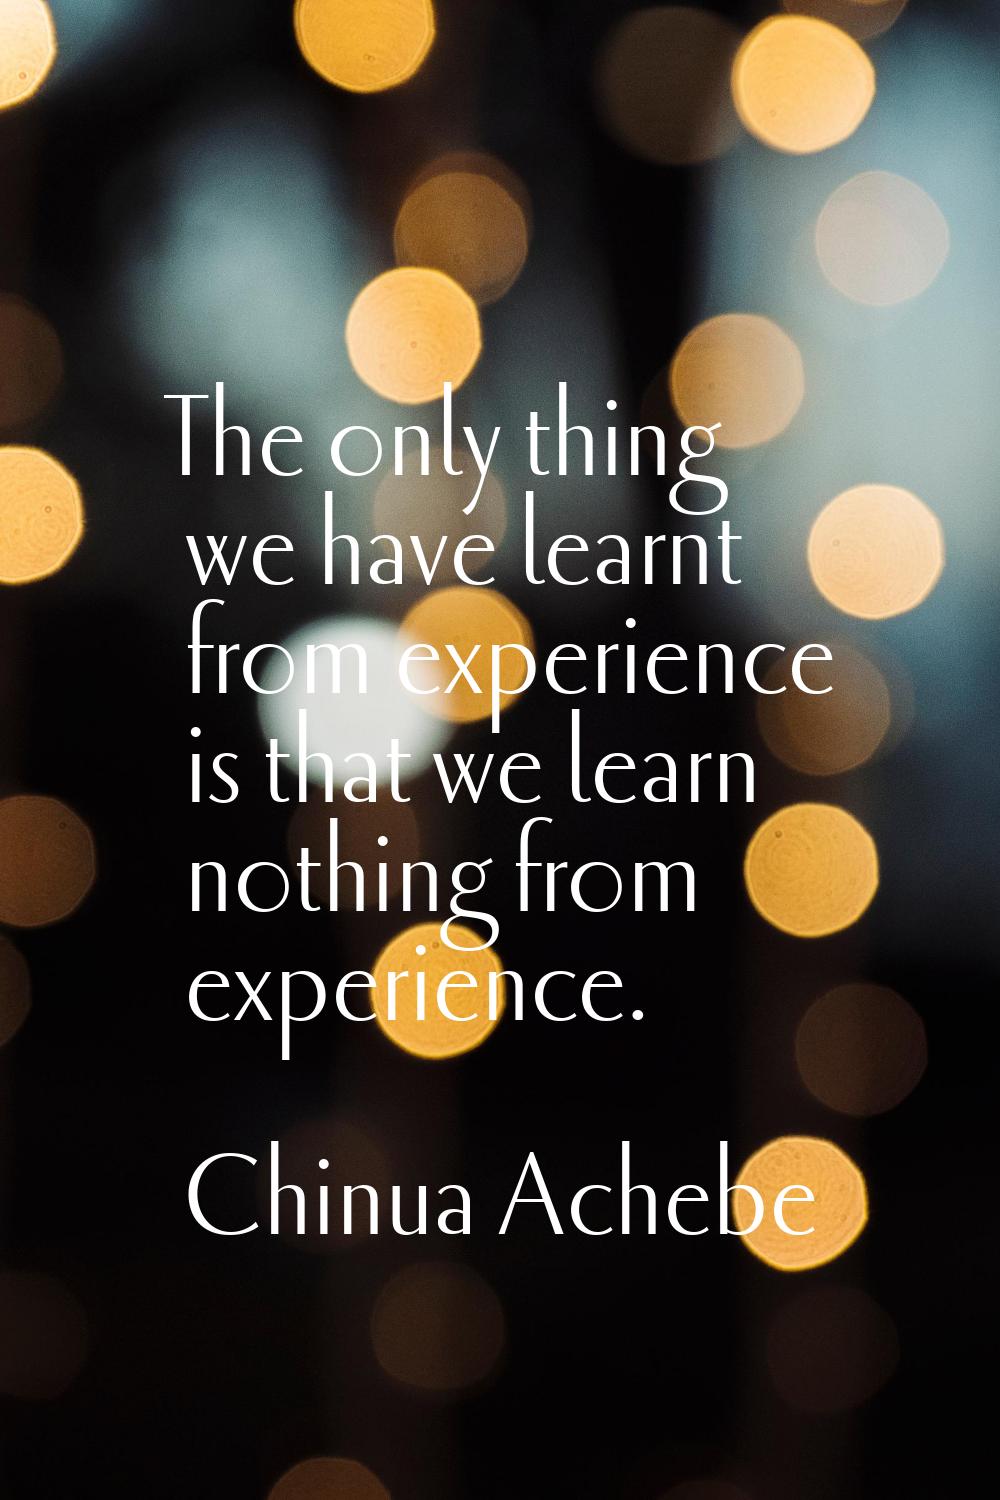 The only thing we have learnt from experience is that we learn nothing from experience.